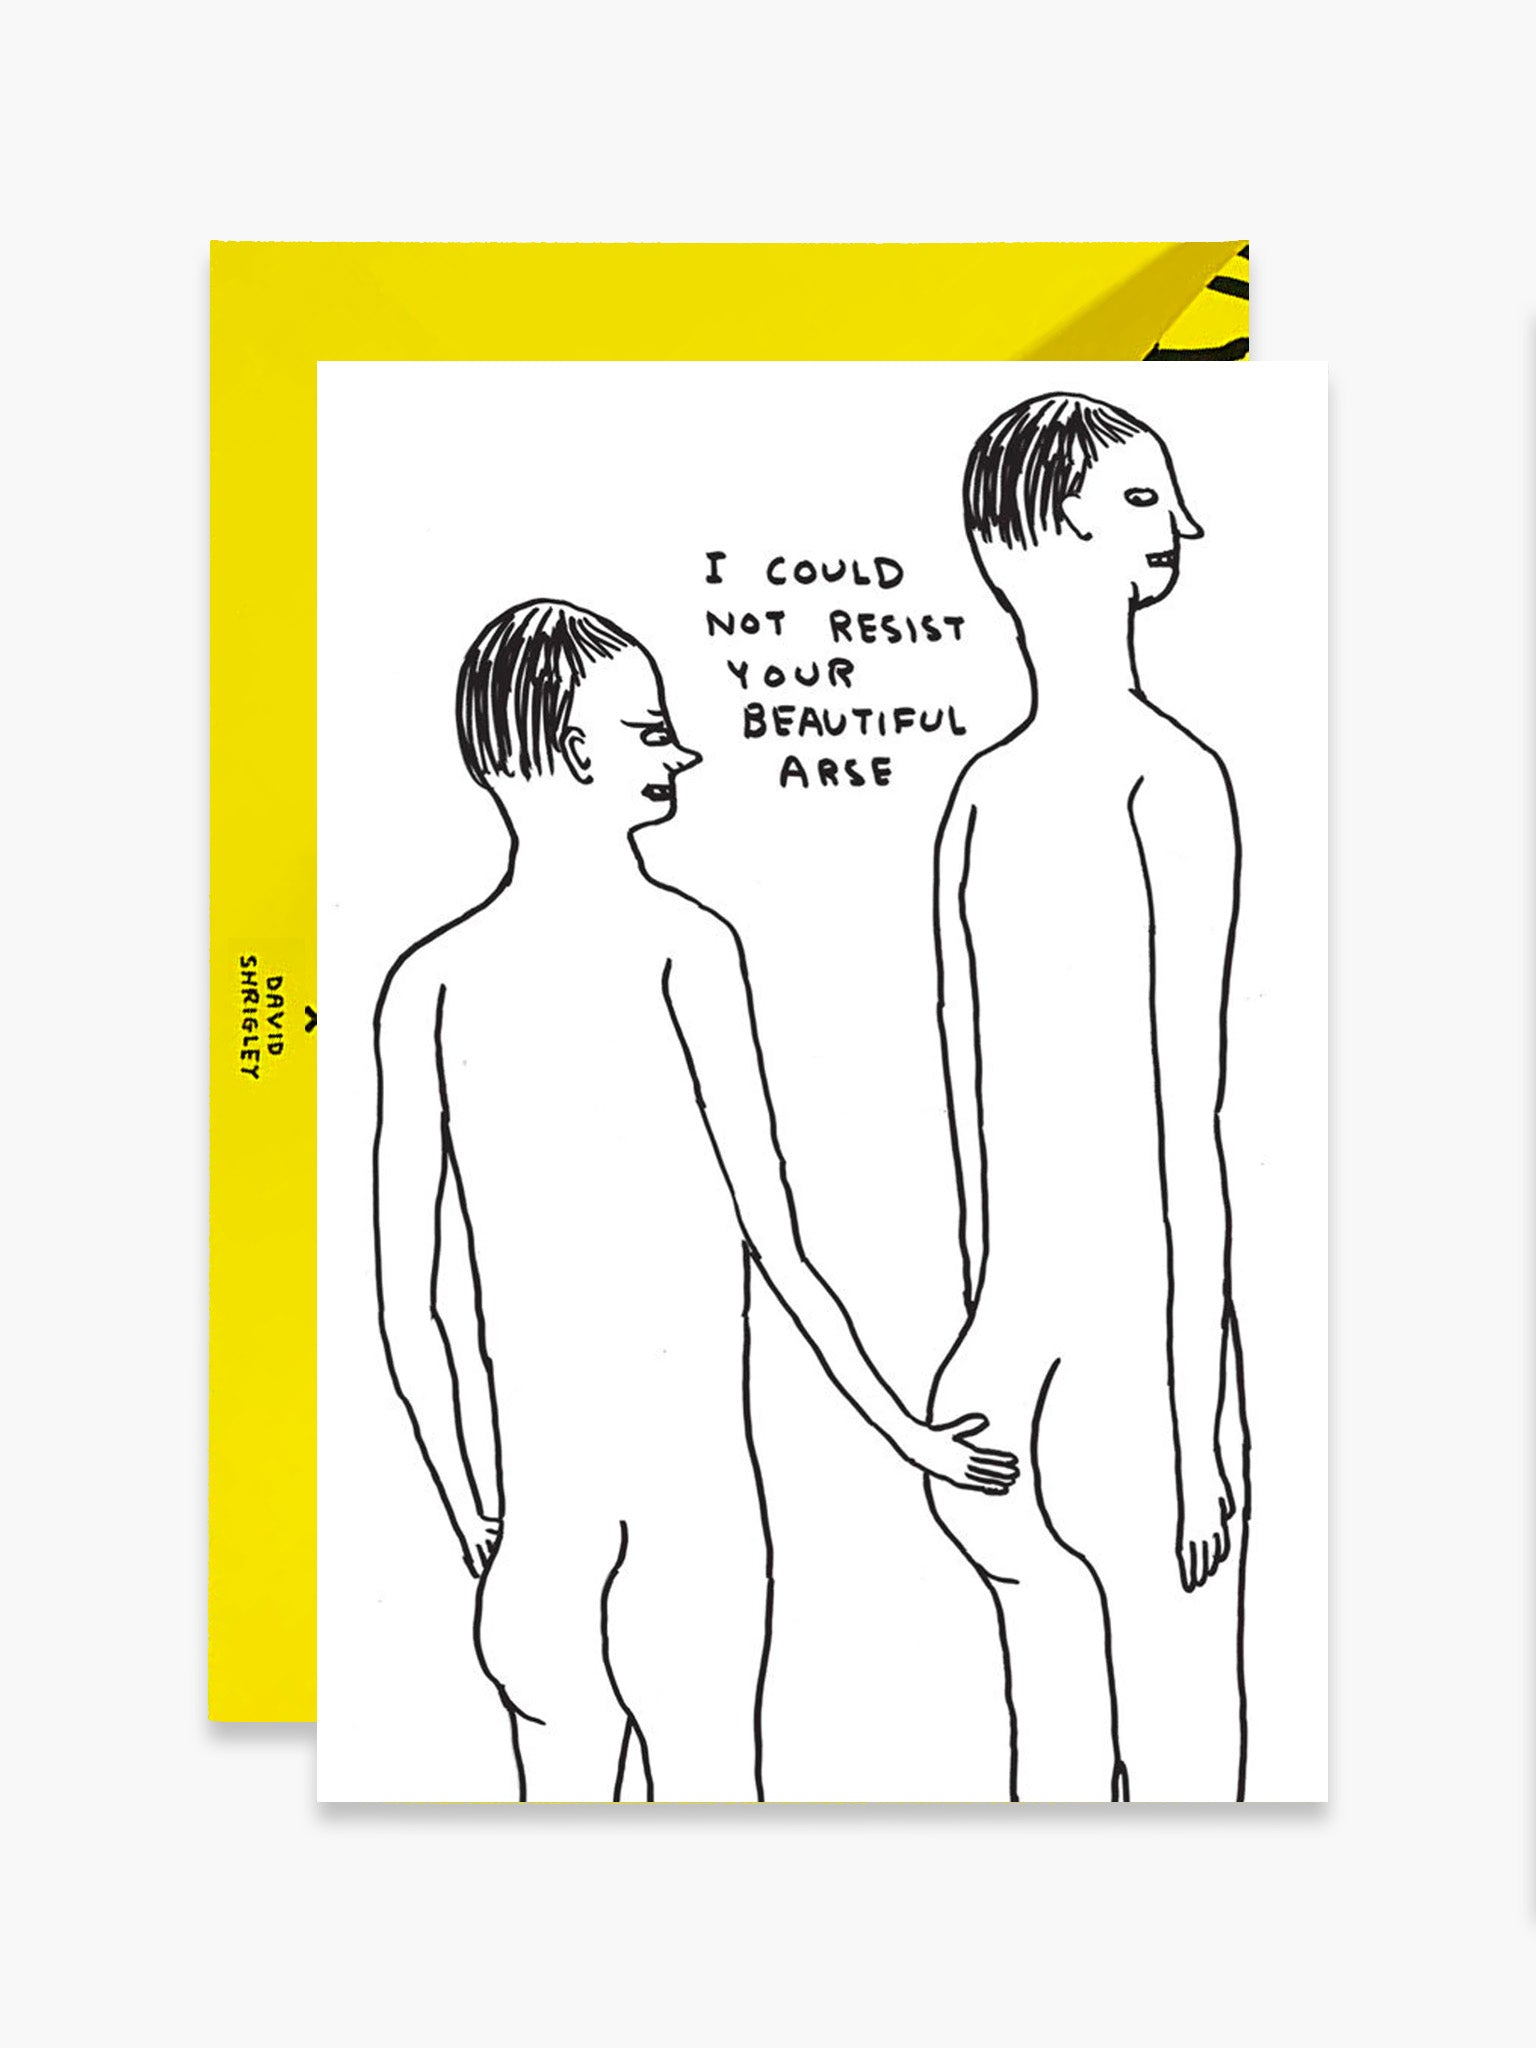 Beautiful Arse Card (I could not resist) x David Shrigley